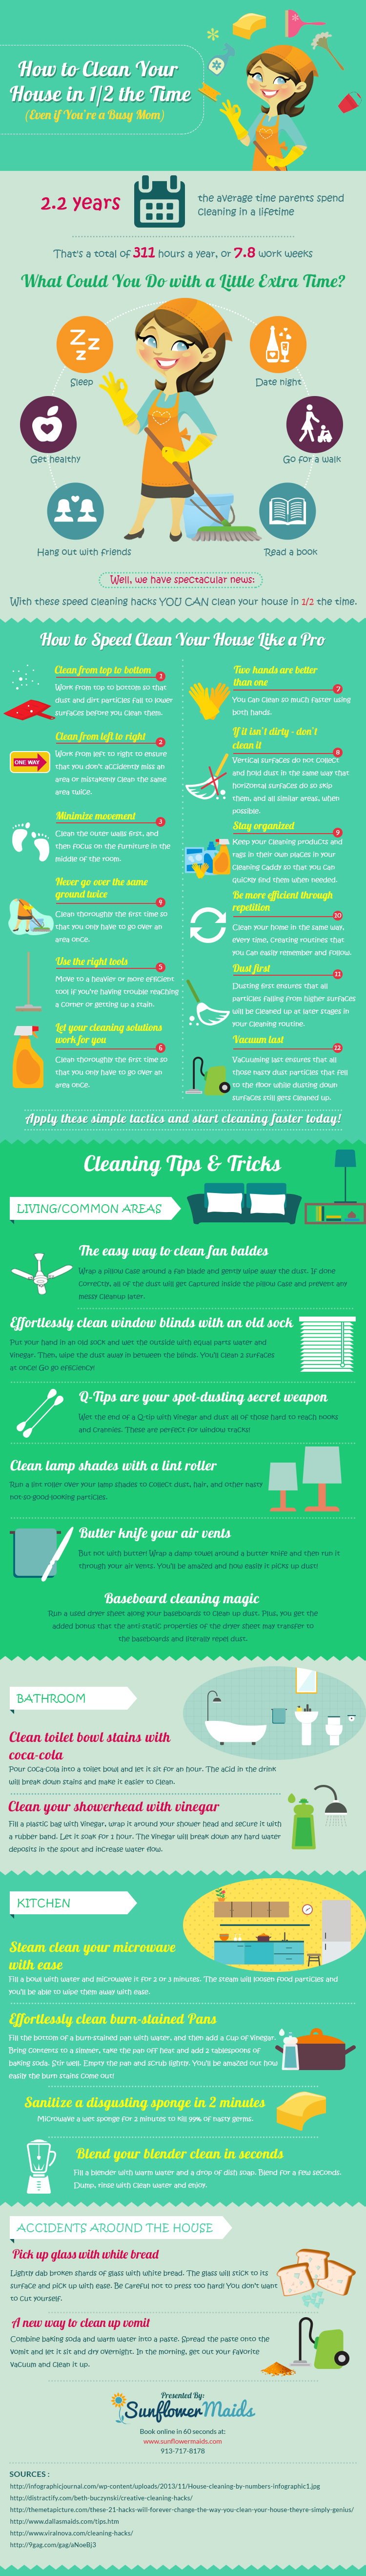 https://sunflowermaids.com/wp-content/uploads/2015/07/how-to-clean-your-house-in-half-the-time-infographic.jpg